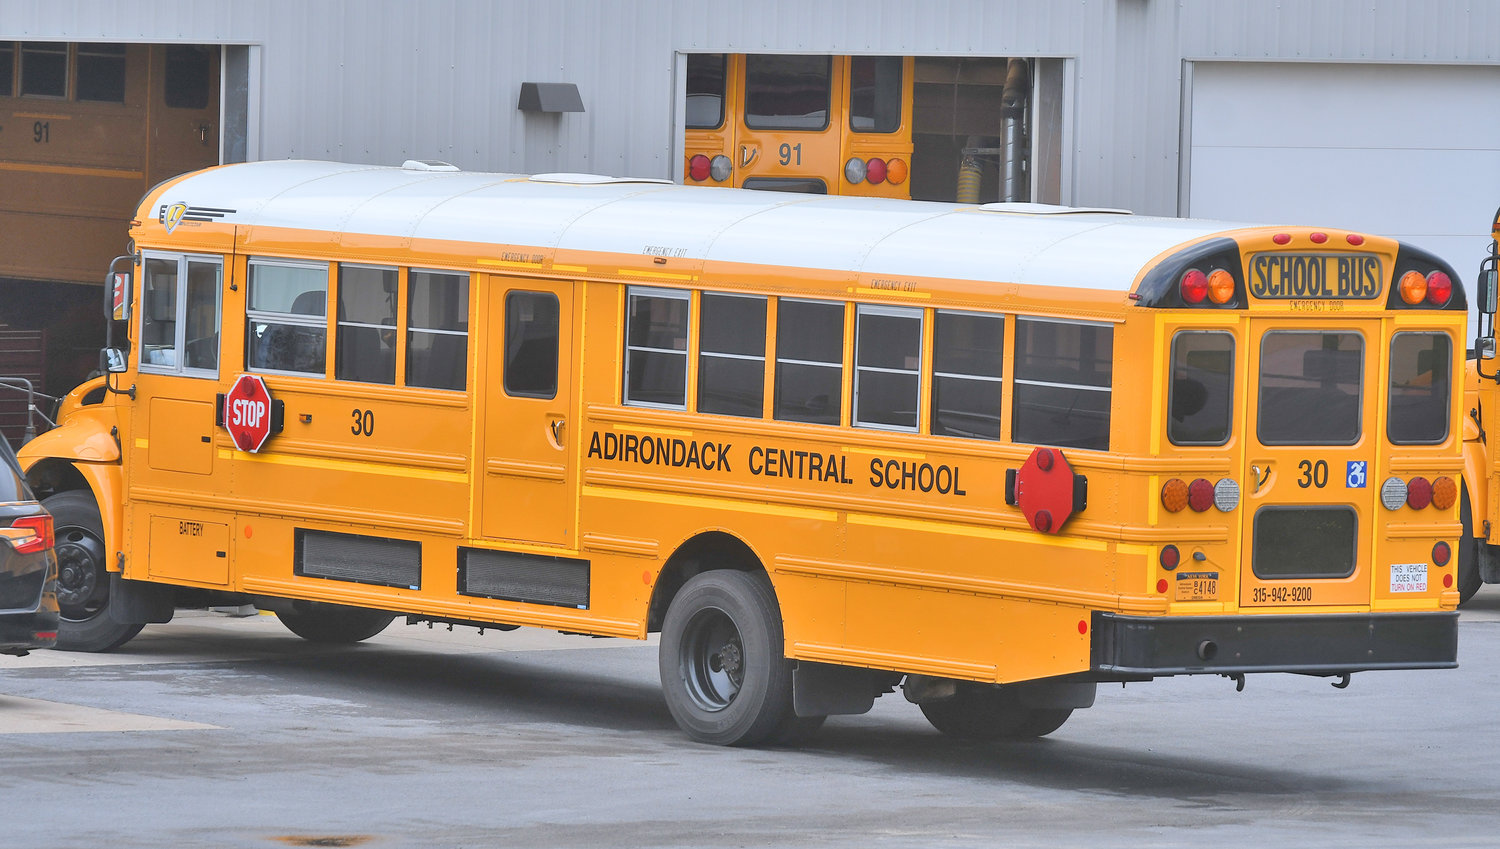 You Must Stop For School Buses With Flashing Red Lights Daily Sentinel